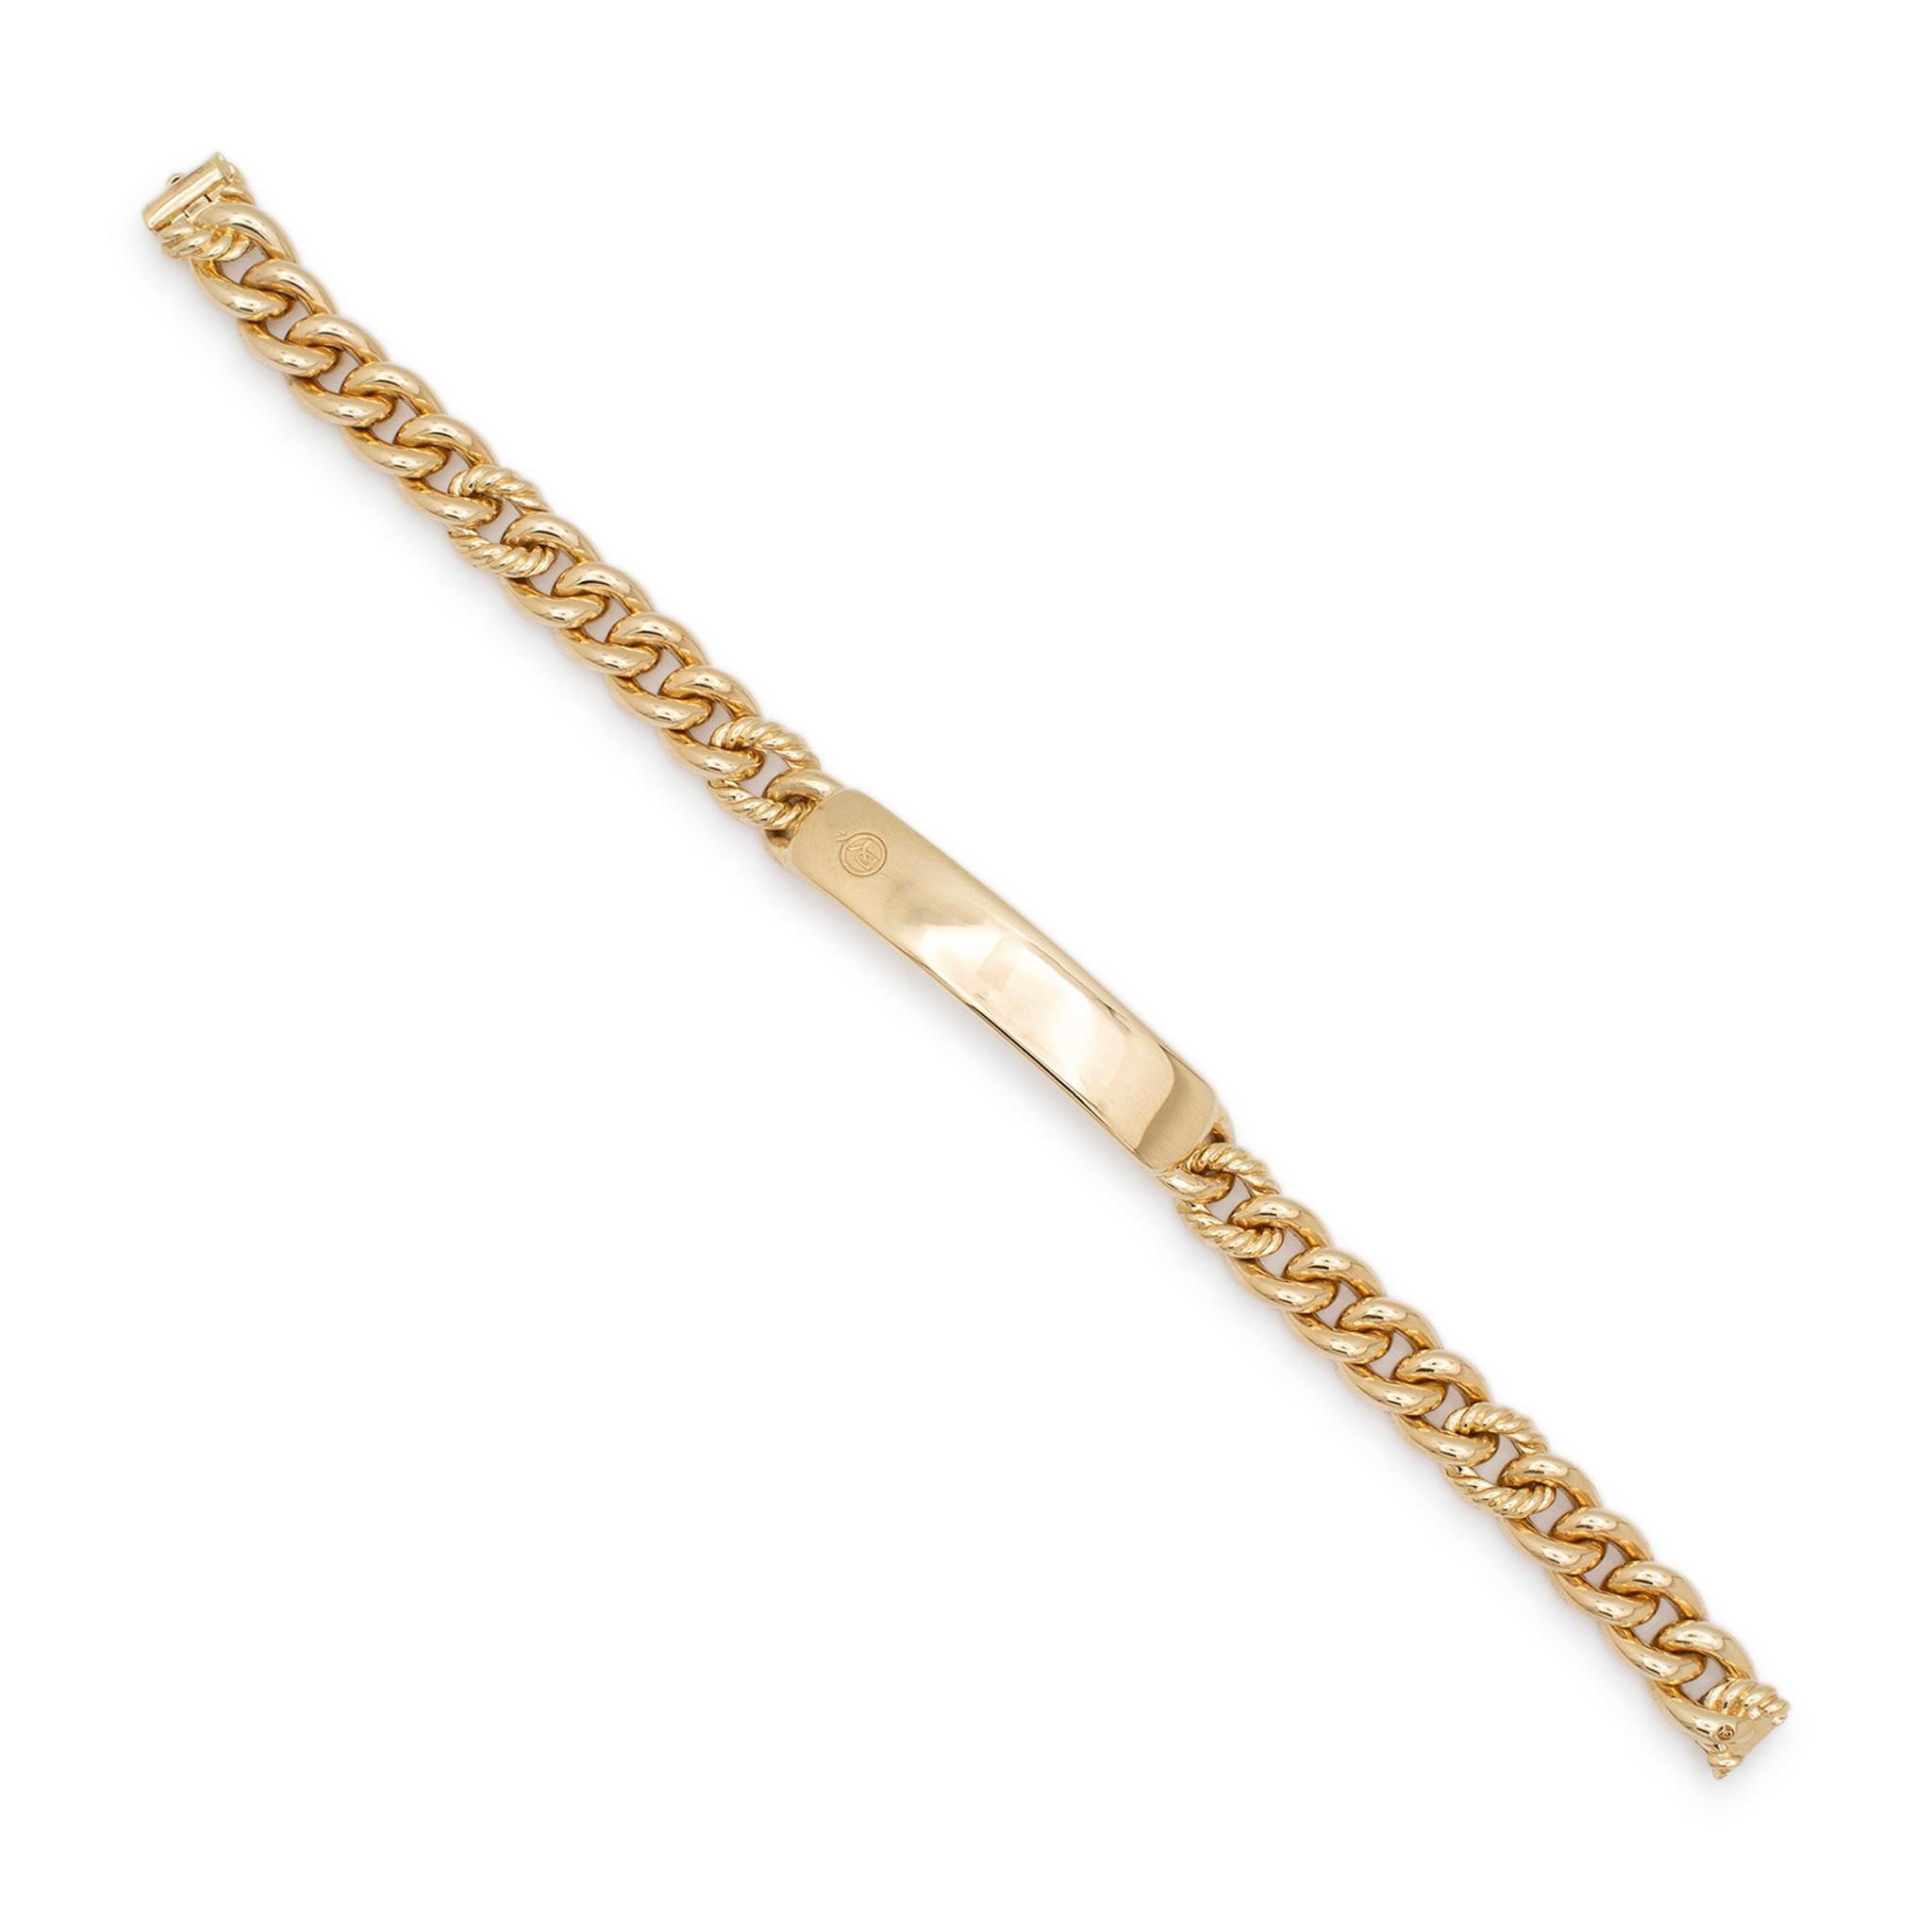 Brand: David Yurman

Gender: Ladies

Metal Type: 18K Yellow Gold

Length: 6.50 inches

Width : 8.75 mm

Weight: 32.95 grams

18K yellow gold link, i.d bracelet. Engraved with 